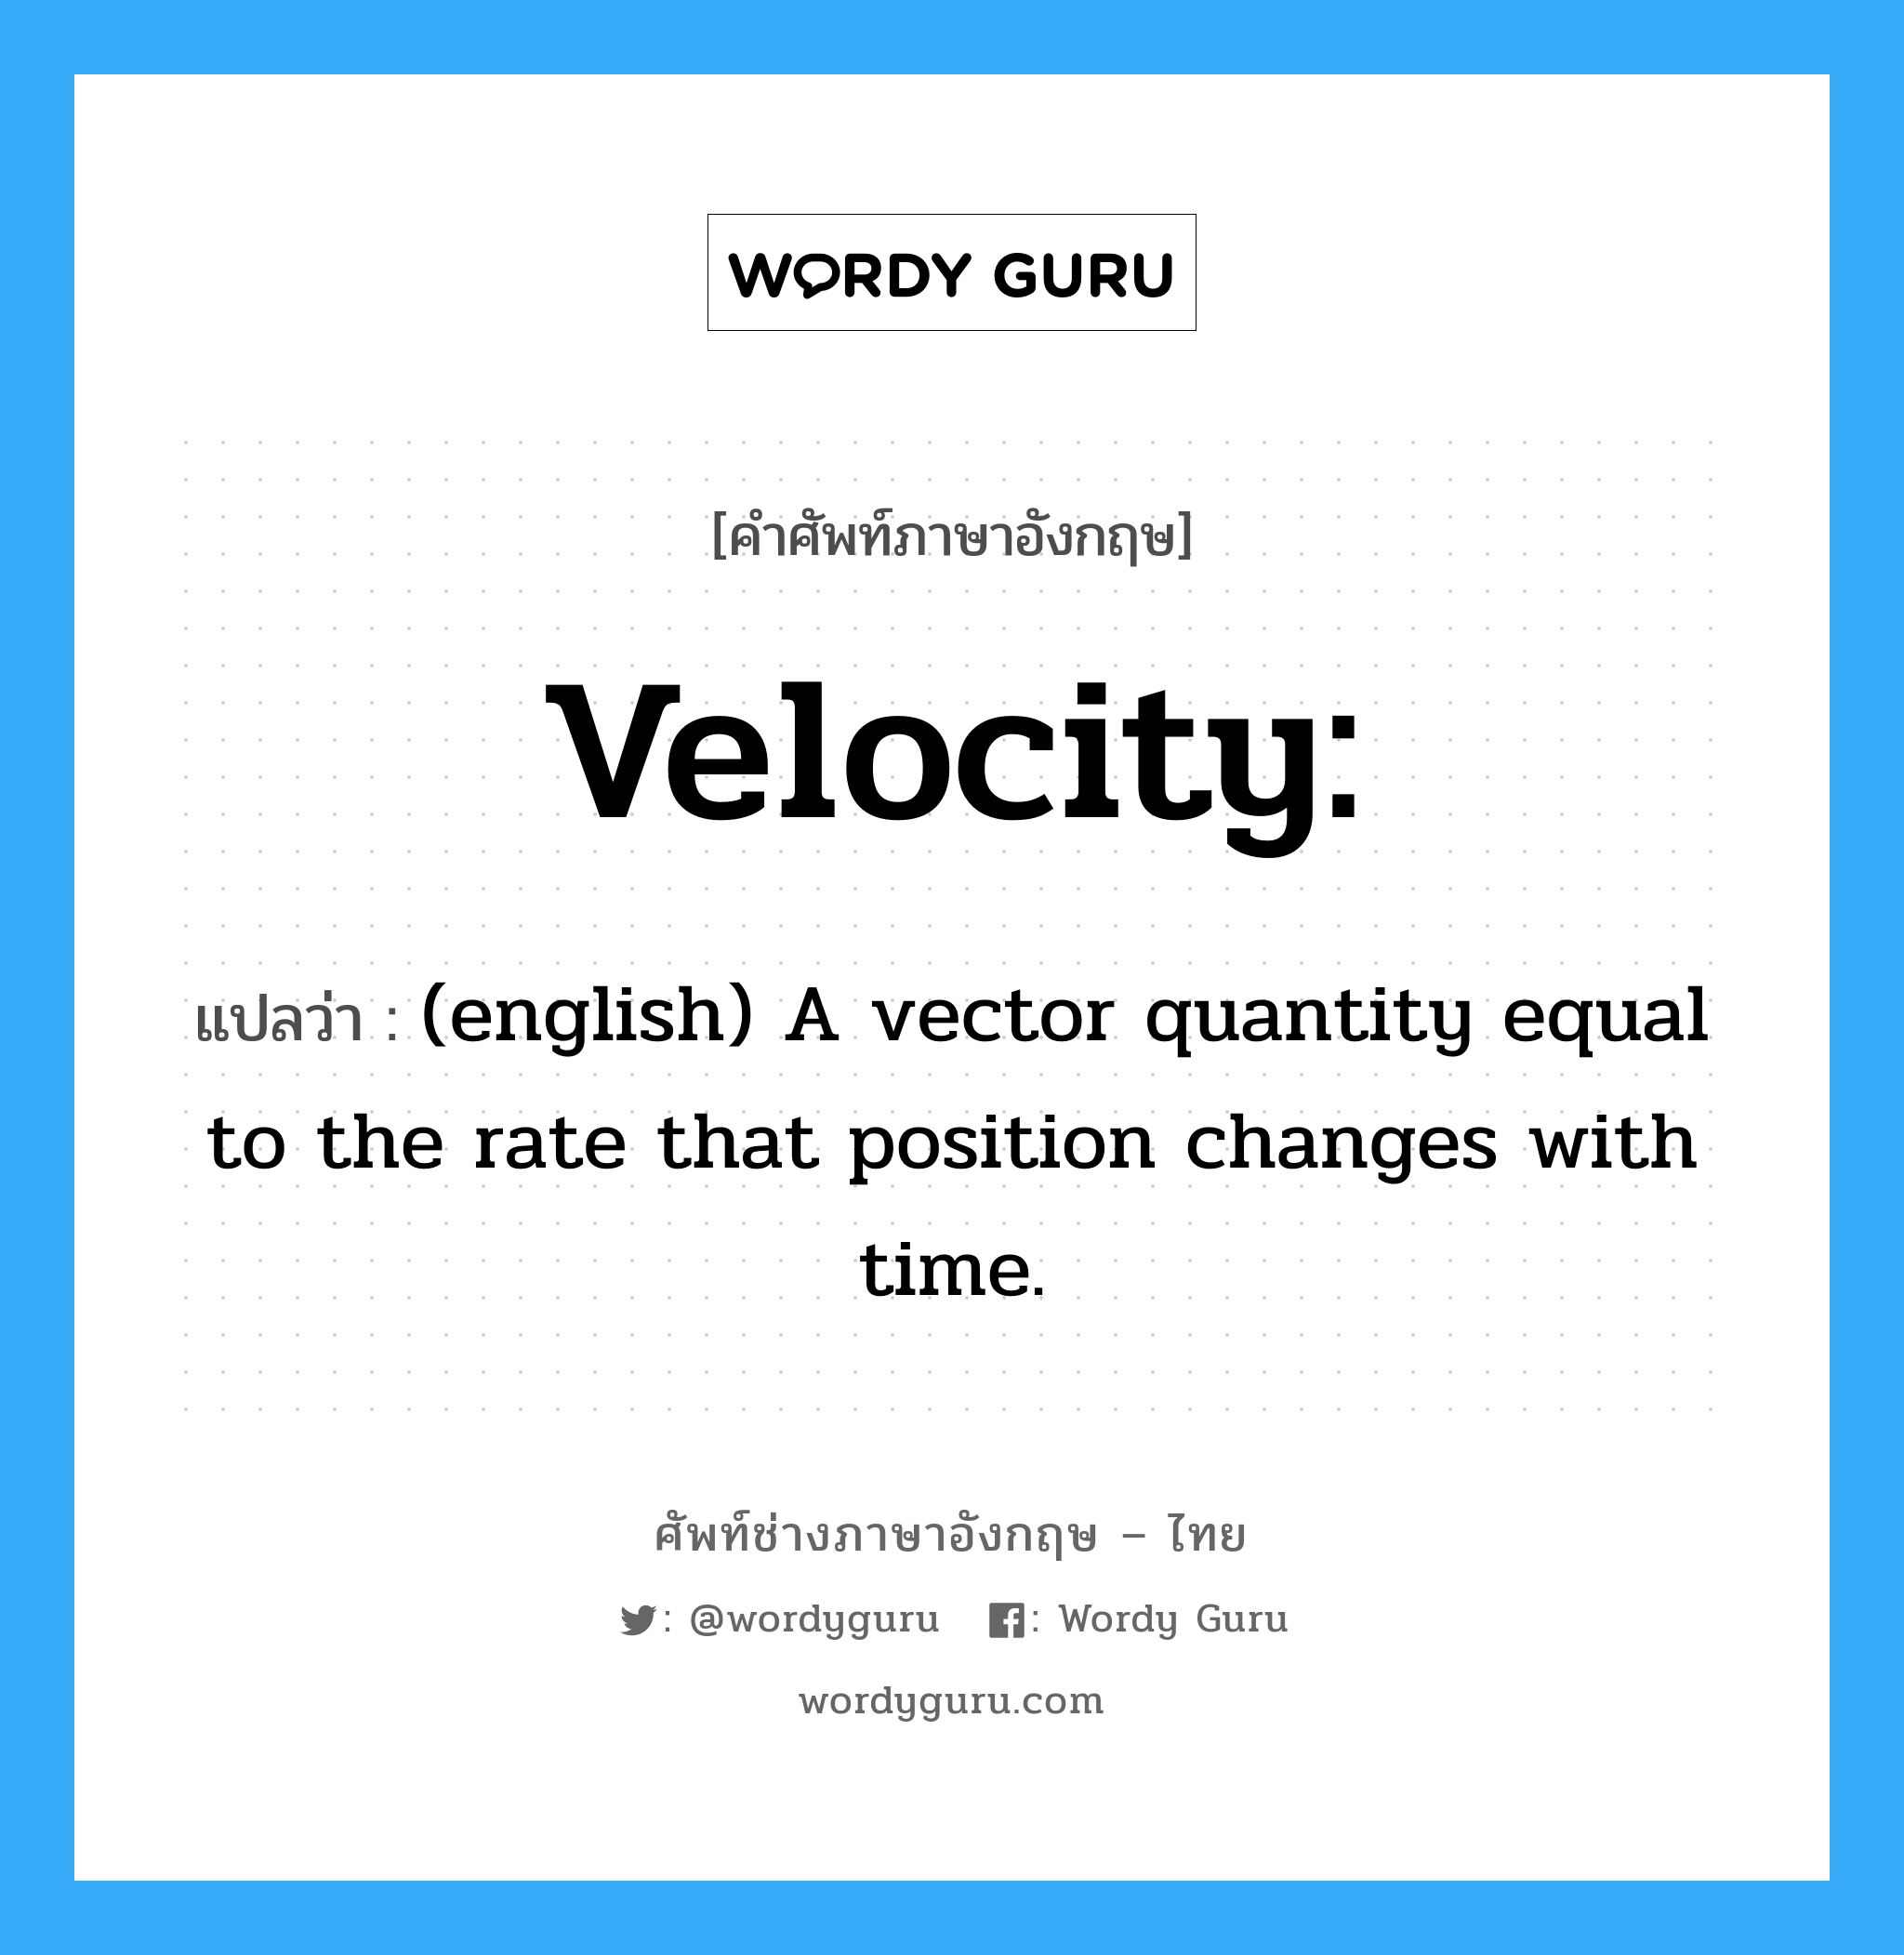 Velocity: แปลว่า?, คำศัพท์ช่างภาษาอังกฤษ - ไทย Velocity: คำศัพท์ภาษาอังกฤษ Velocity: แปลว่า (english) A vector quantity equal to the rate that position changes with time.